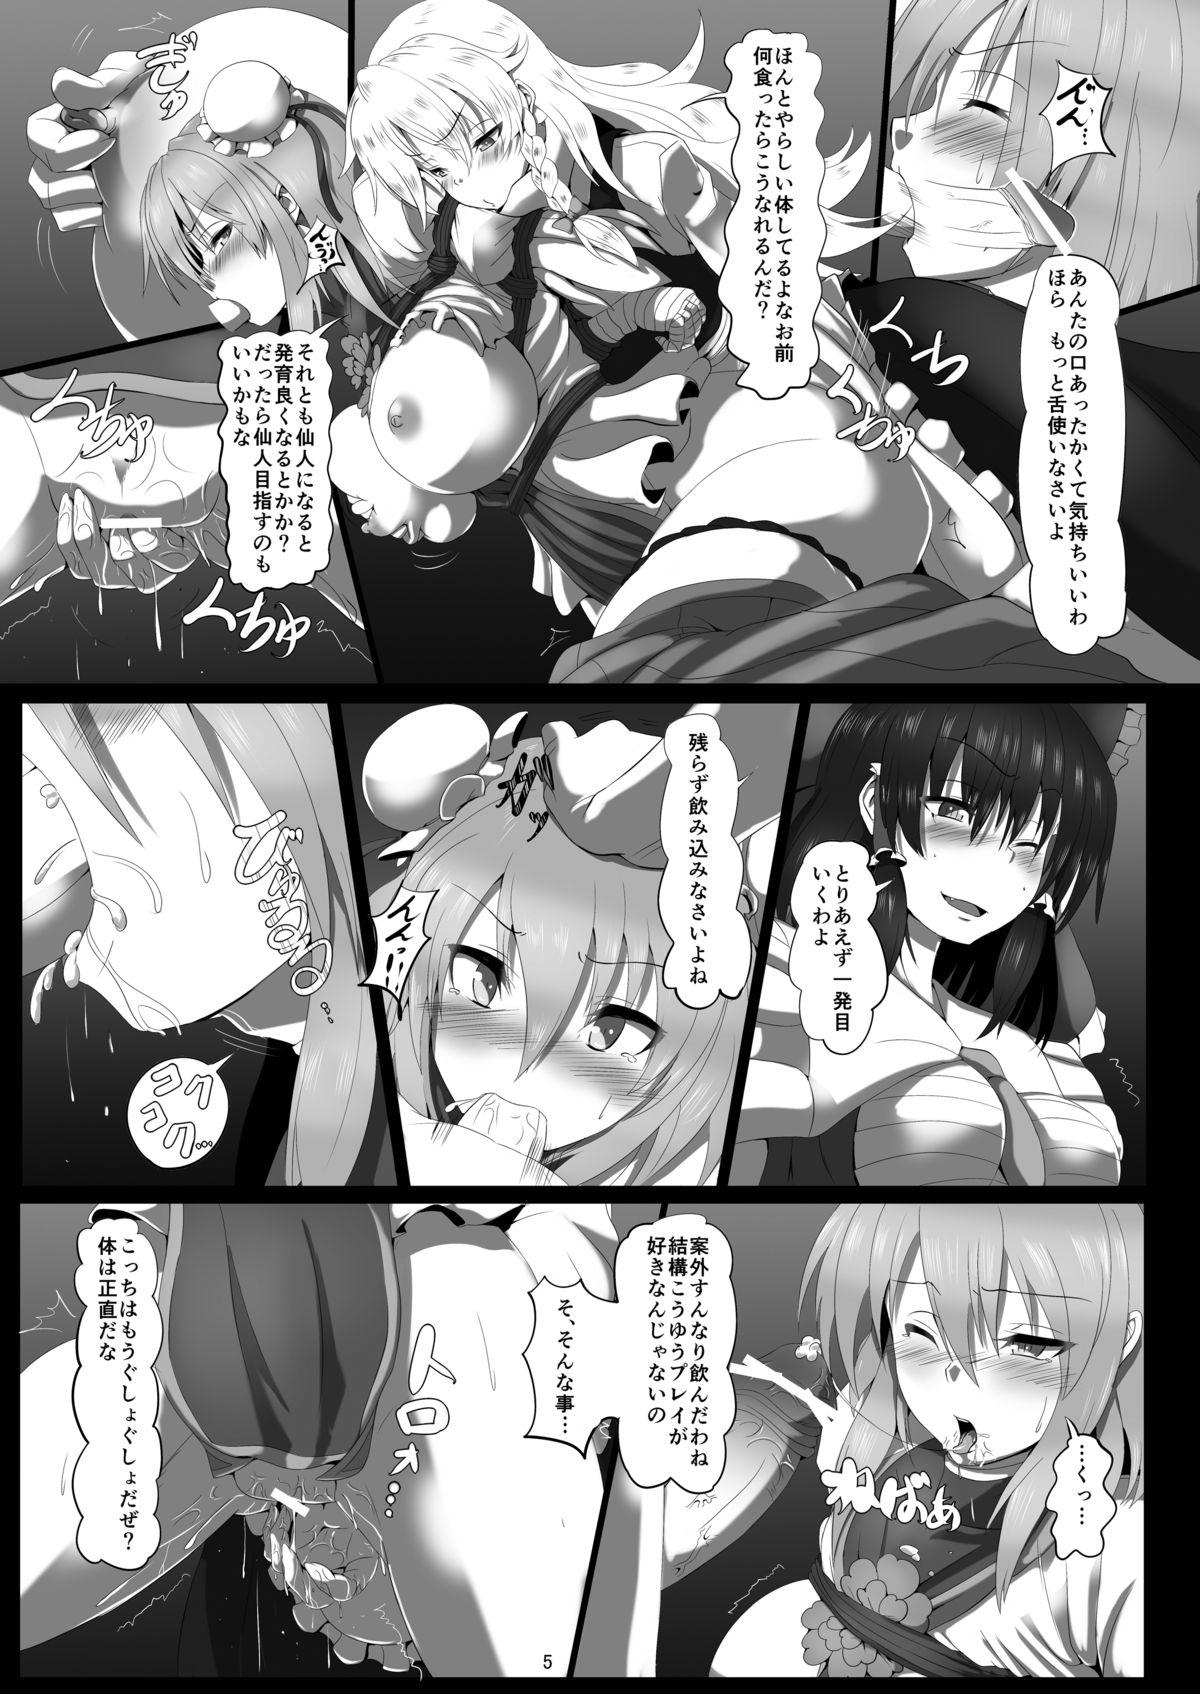 Erotica Kasen no Kankei - Touhou project Indonesian - Page 6